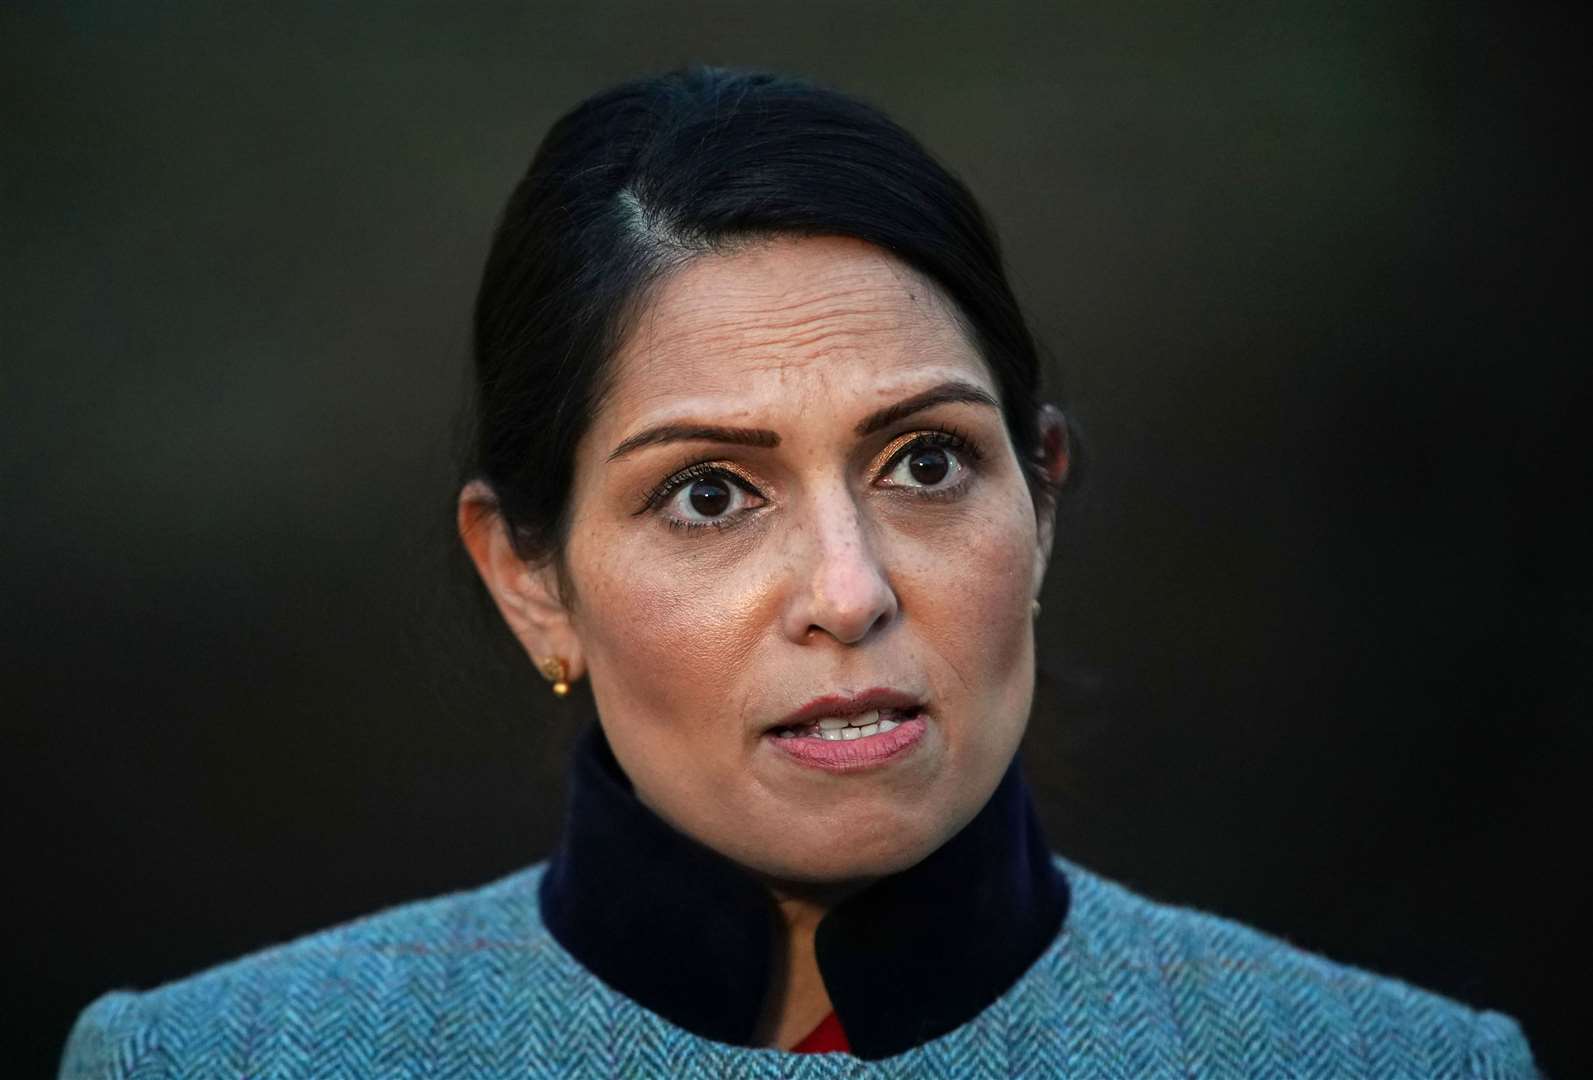 Home Secretary Priti Patel insists the reforms will make the asylum system ‘fair but firm’ (Aaron Chown/PA)